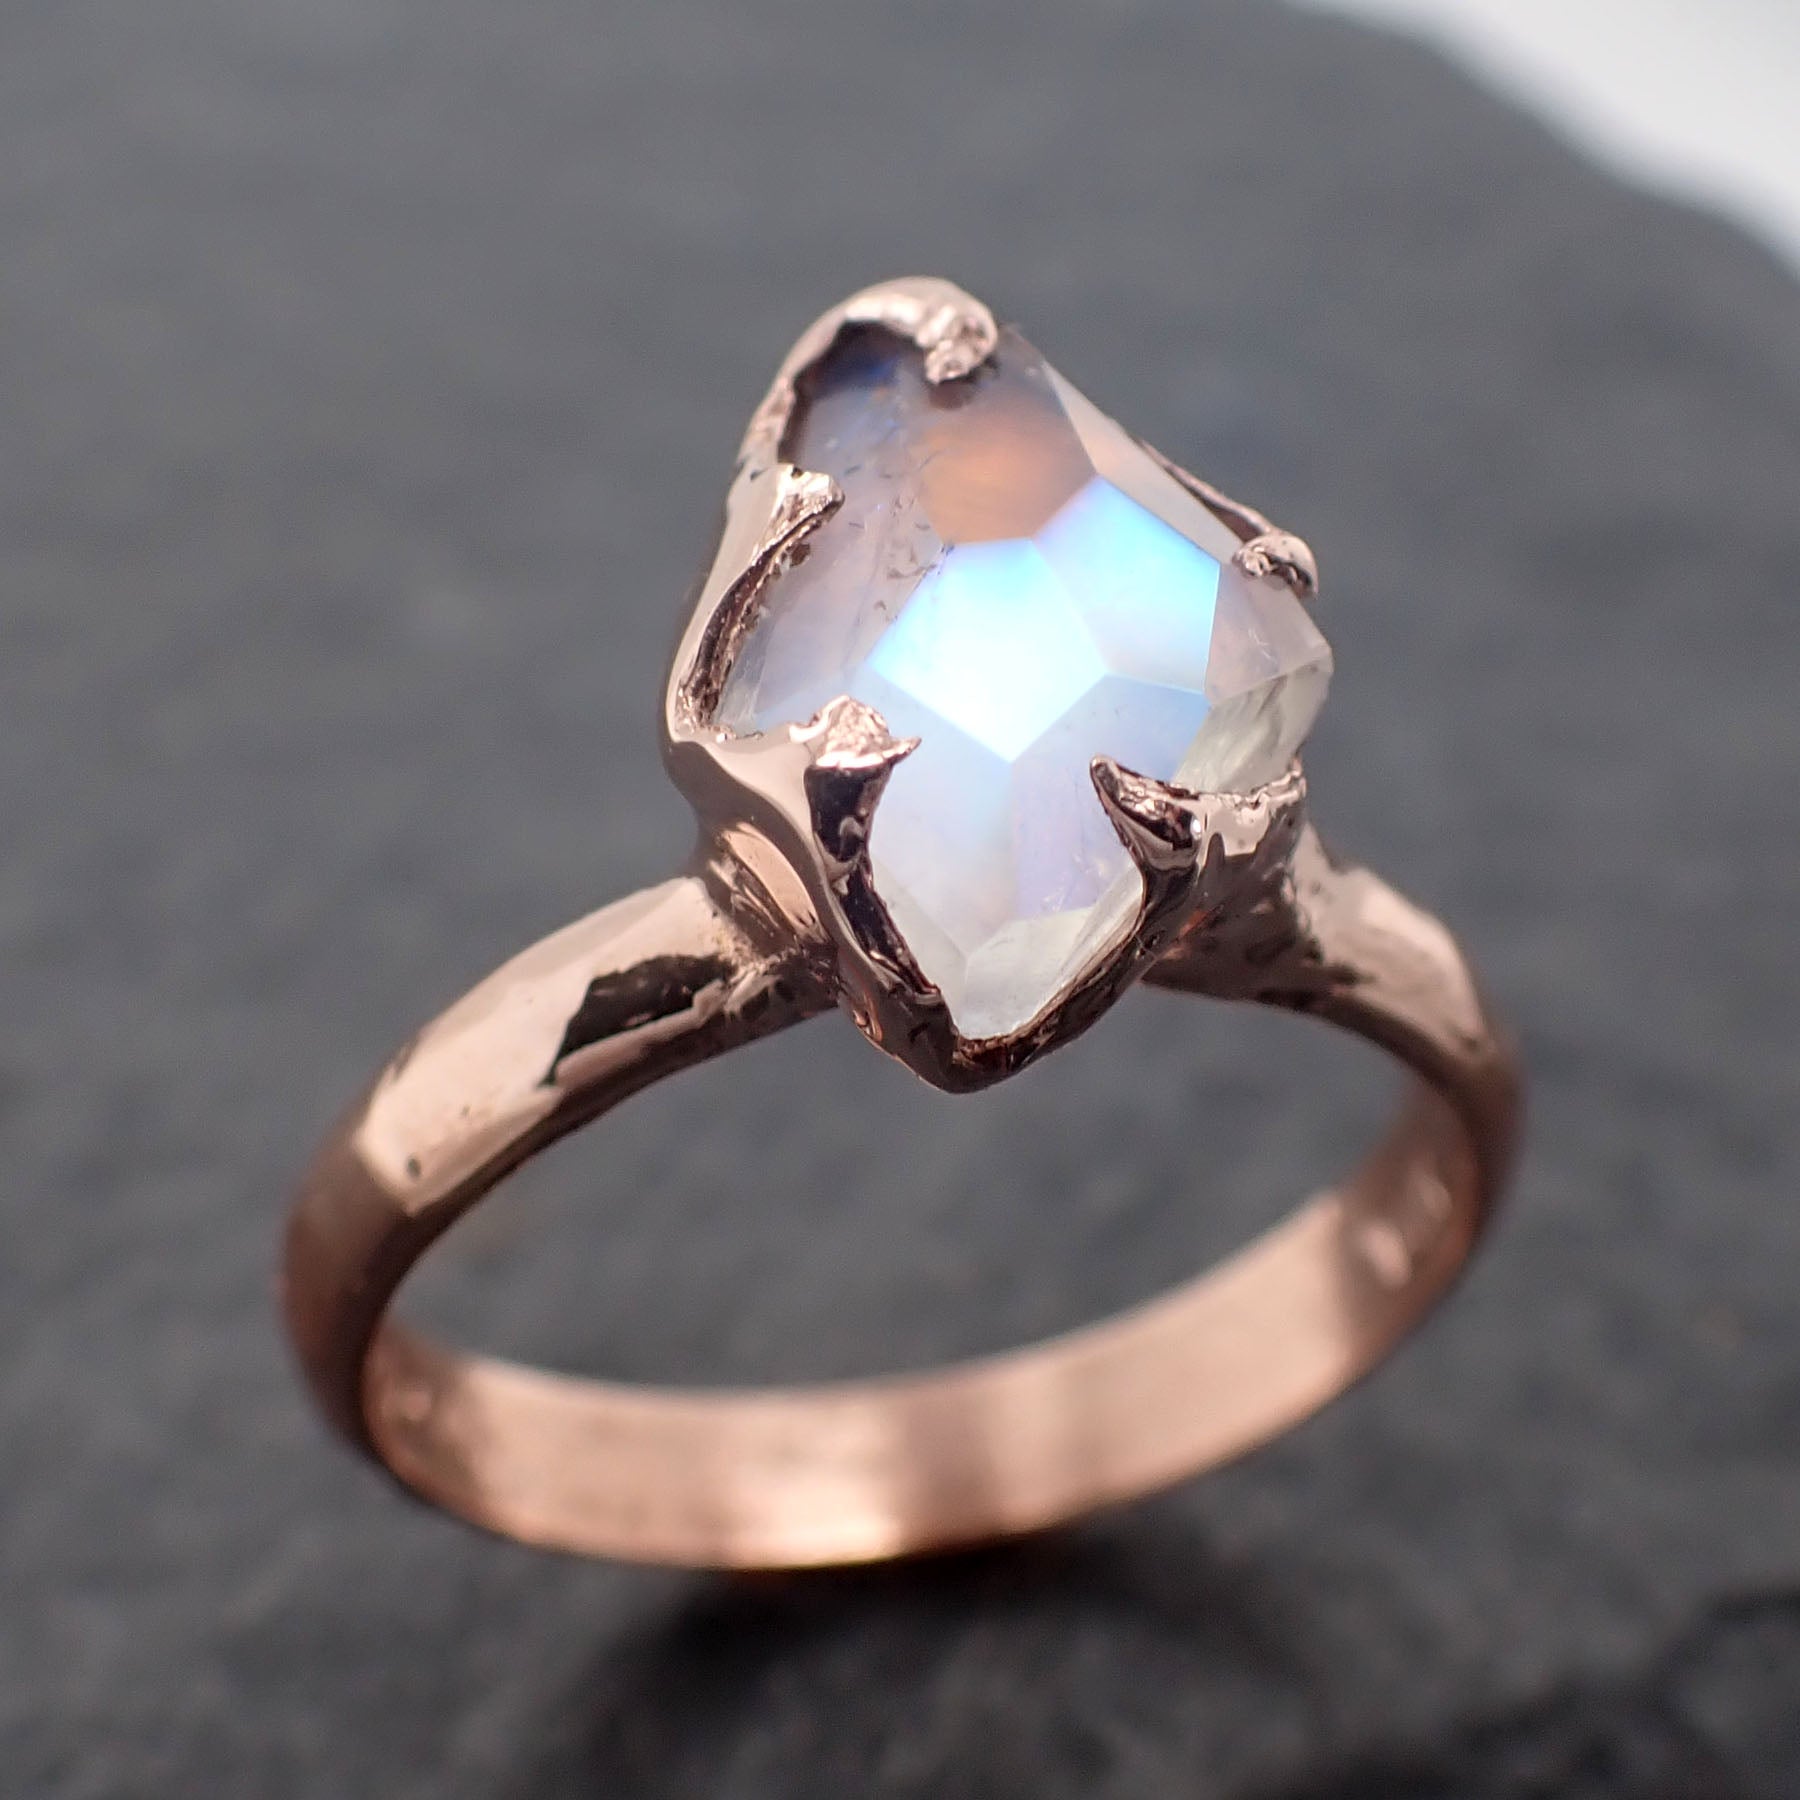 Partially Faceted Moonstone 14k Rose Gold Ring Gemstone Solitaire recycled statement cocktail statement 2470